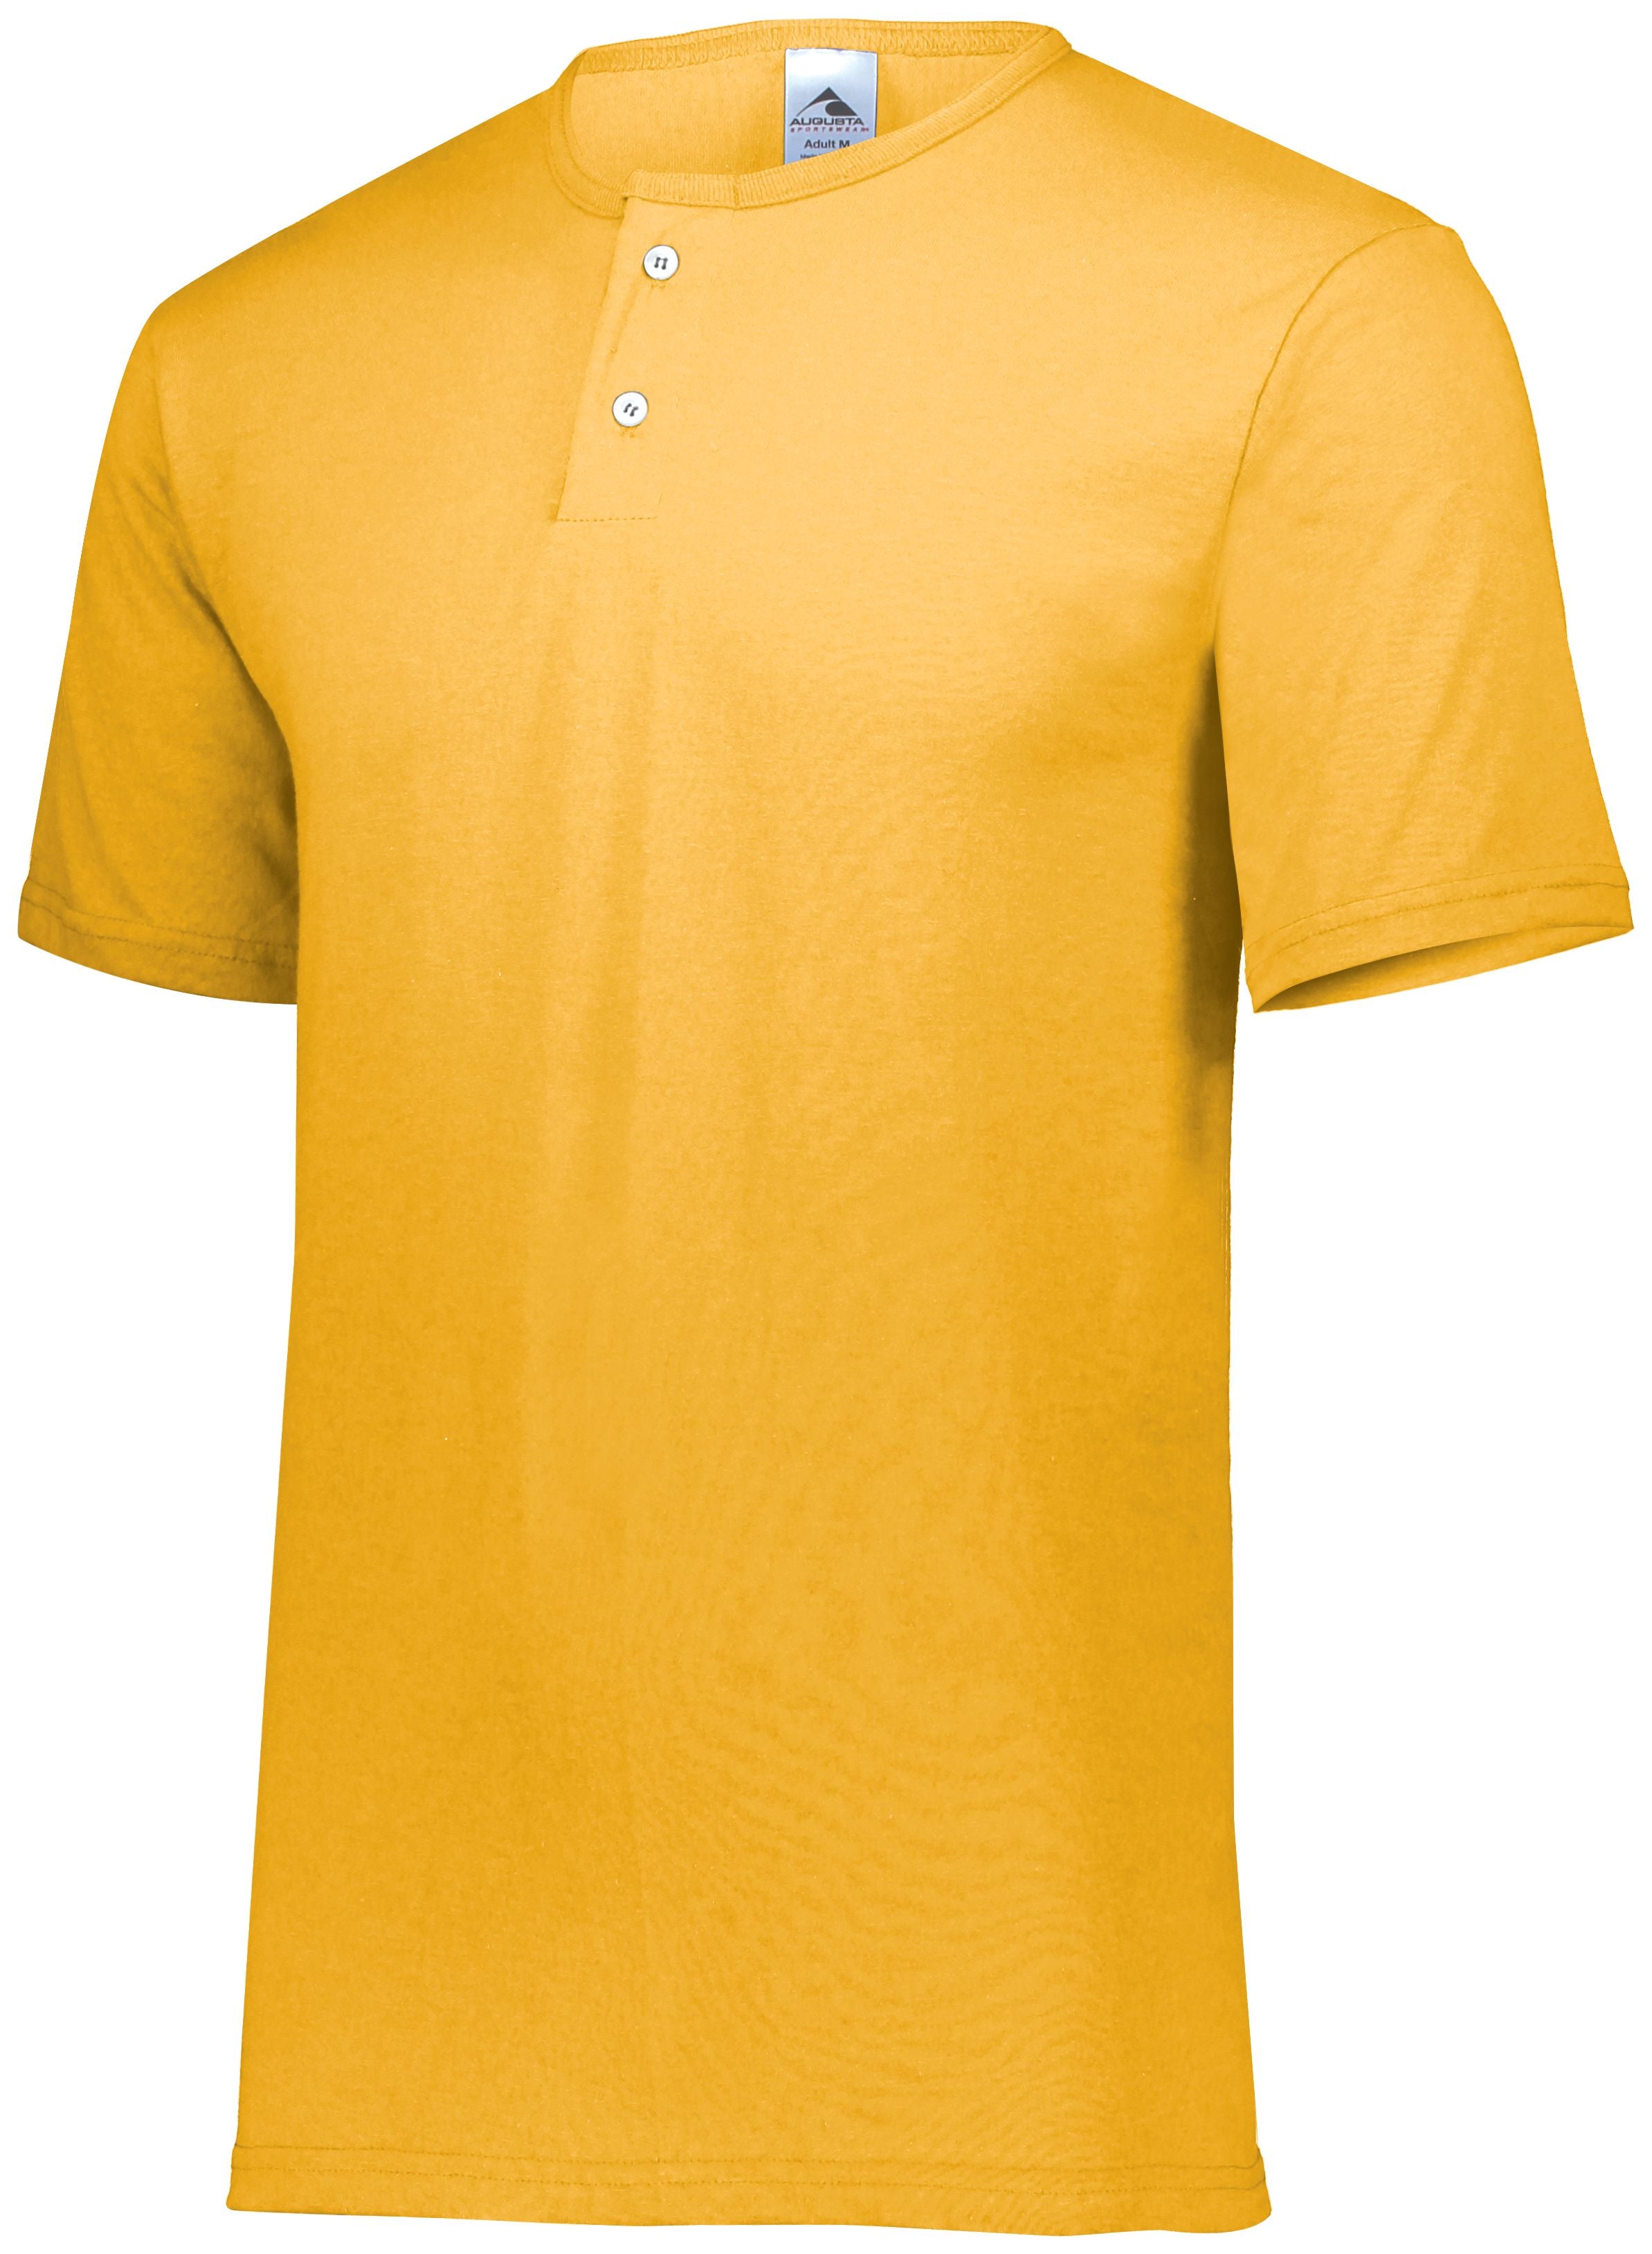 Augusta Sportswear Two-Button Baseball Jersey in Gold  -Part of the Adult, Adult-Jersey, Augusta-Products, Baseball, Shirts, All-Sports, All-Sports-1 product lines at KanaleyCreations.com